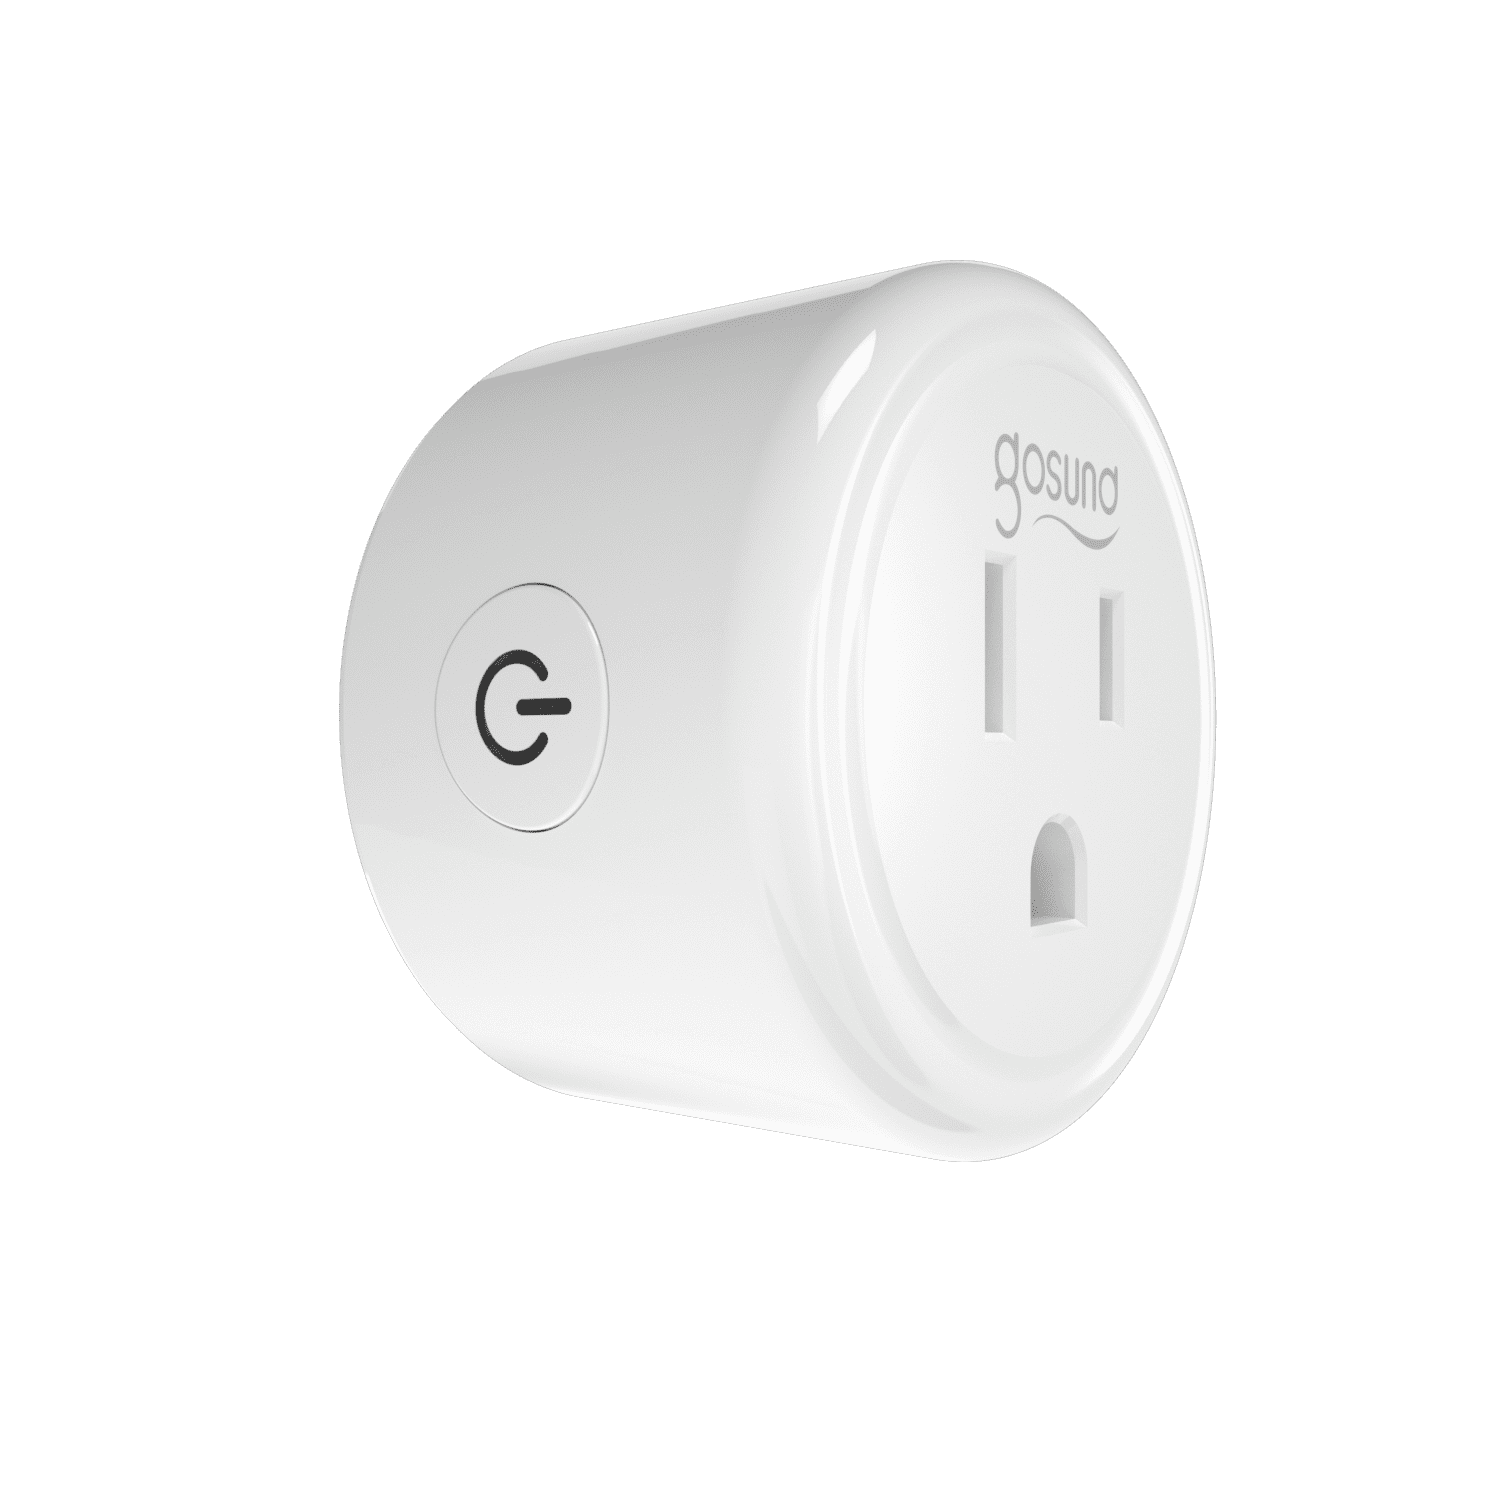 Smart WiFi Mini Plug Outlet, Works with Alexa and Google Home, Voice C –  Sungale E-Store